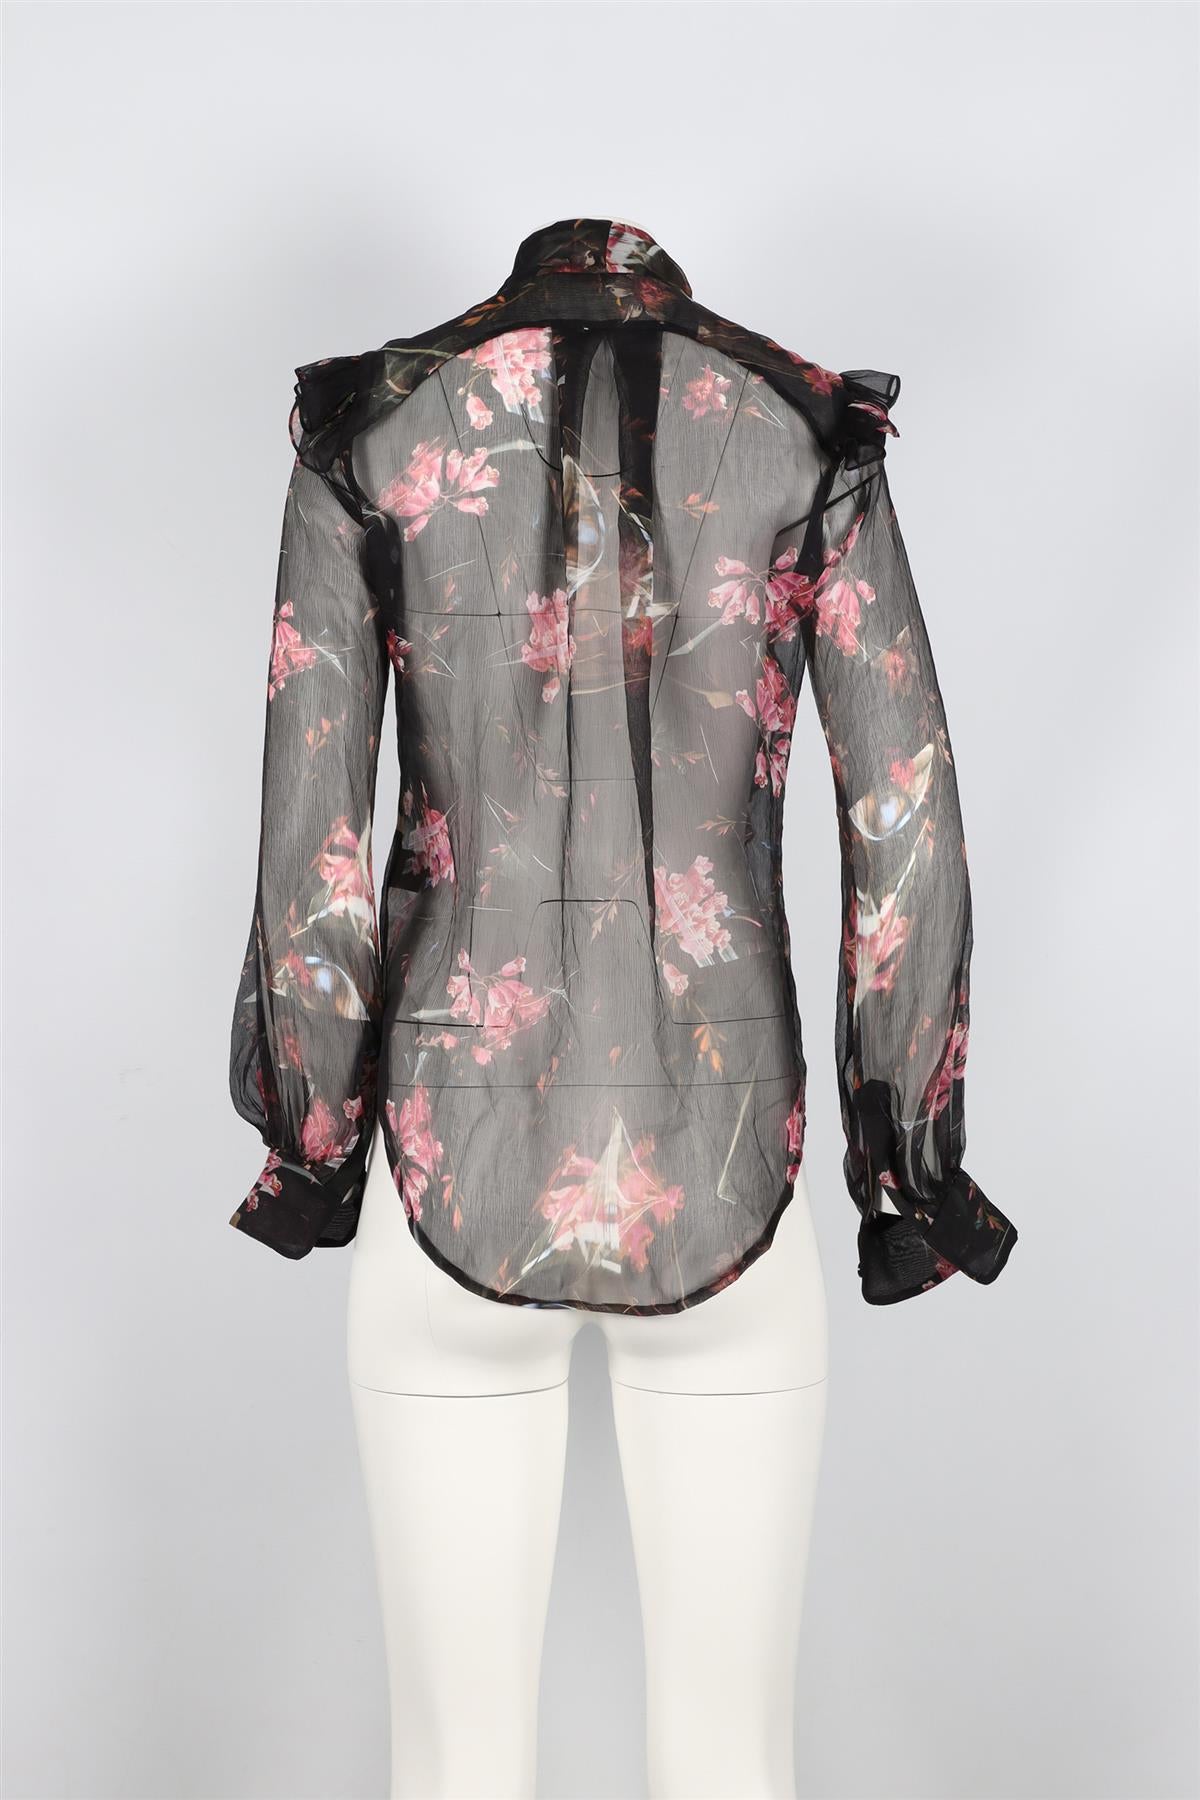 PREEN BY THORNTON BREGAZZI BLACK AND PINK FLORAL SILK TOP